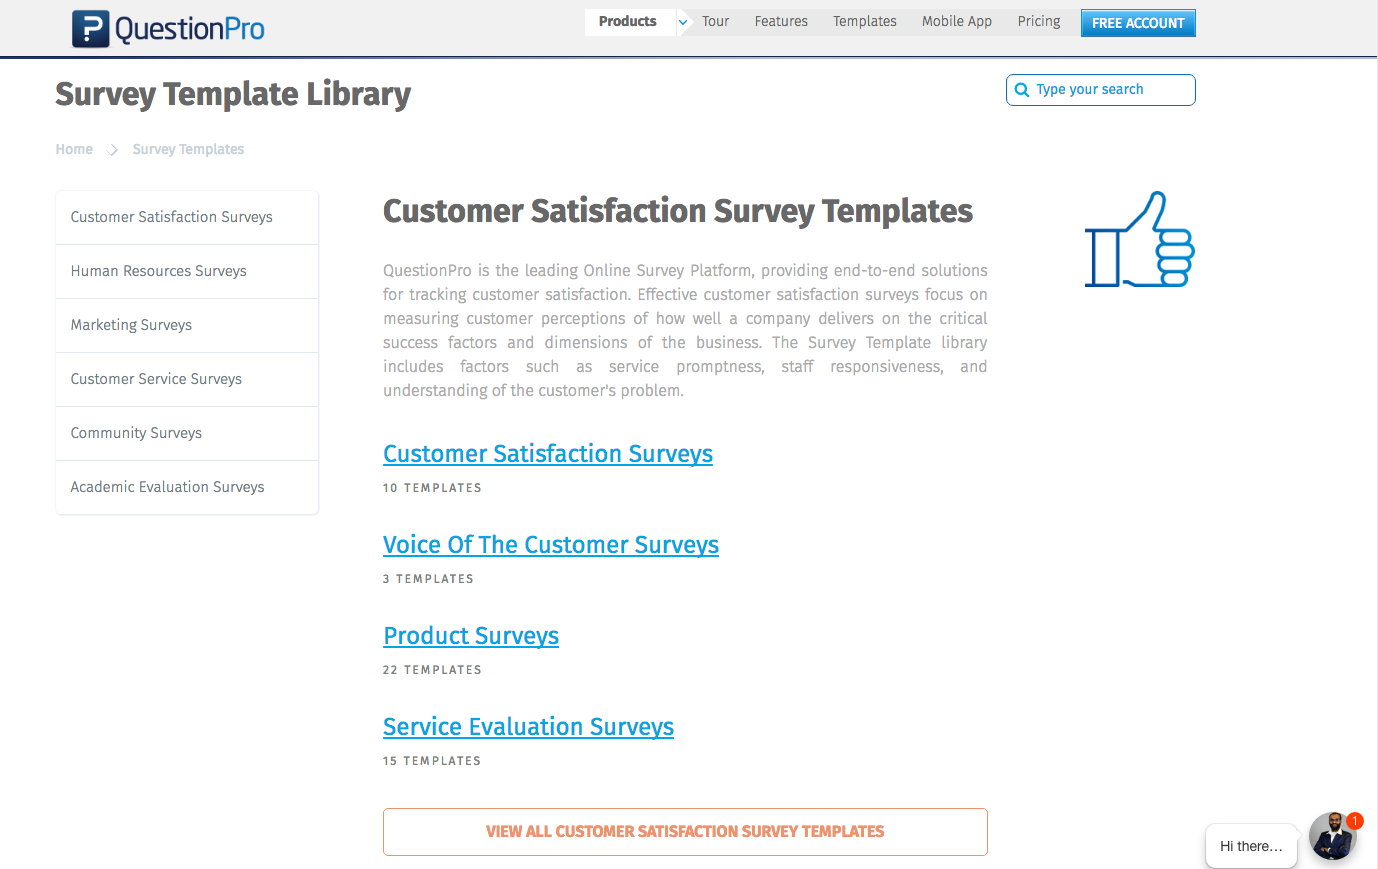 Download Survey Templates In Under A Minute Now Possible With Questionpro Questionpro